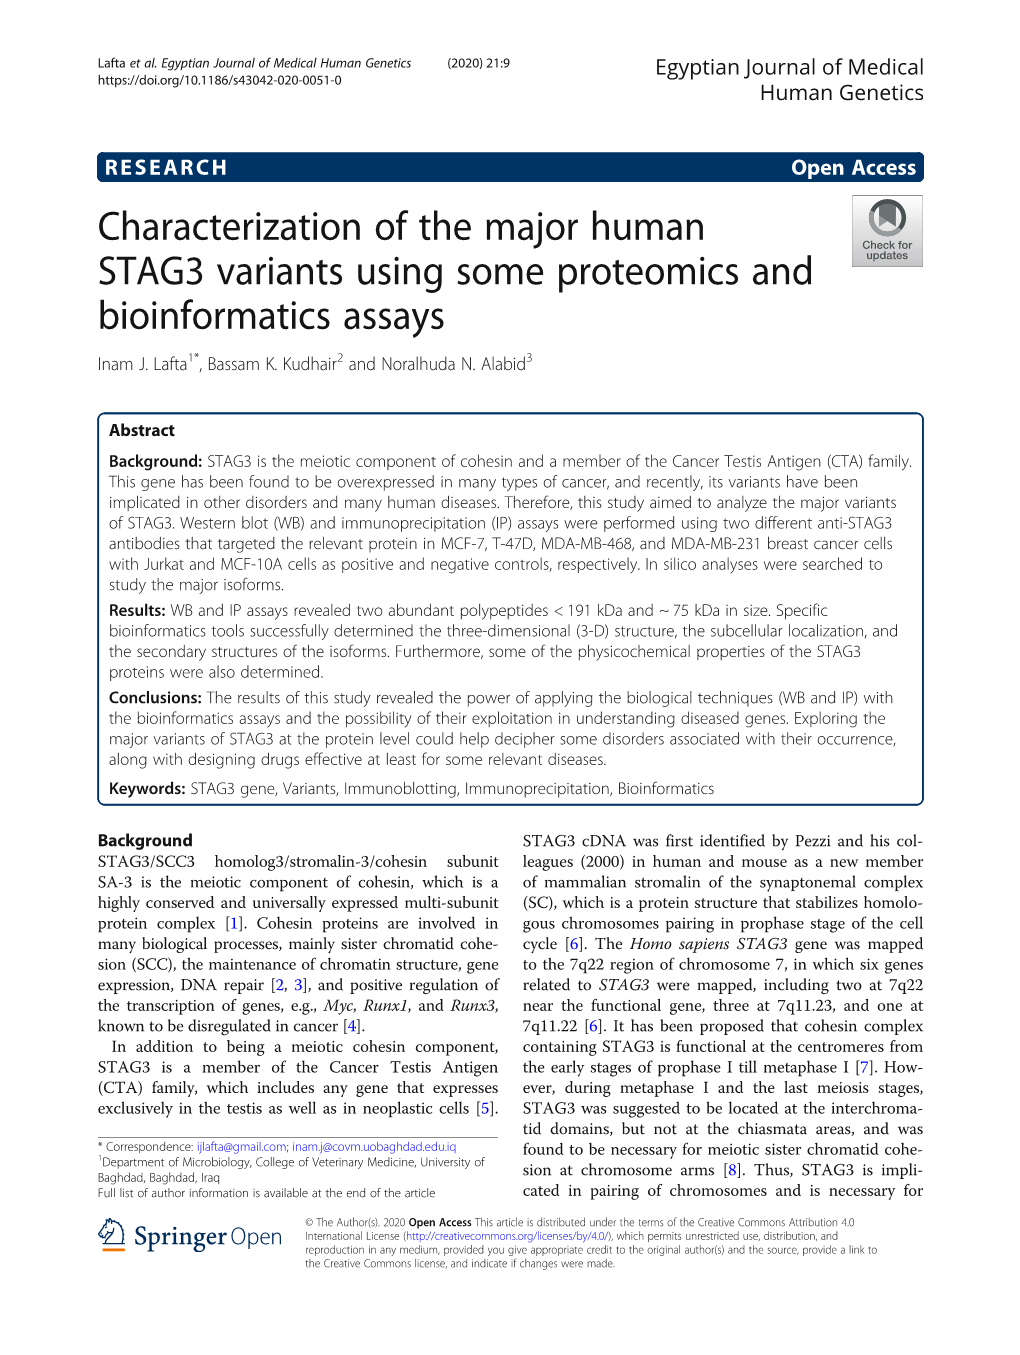 Characterization of the Major Human STAG3 Variants Using Some Proteomics and Bioinformatics Assays Inam J